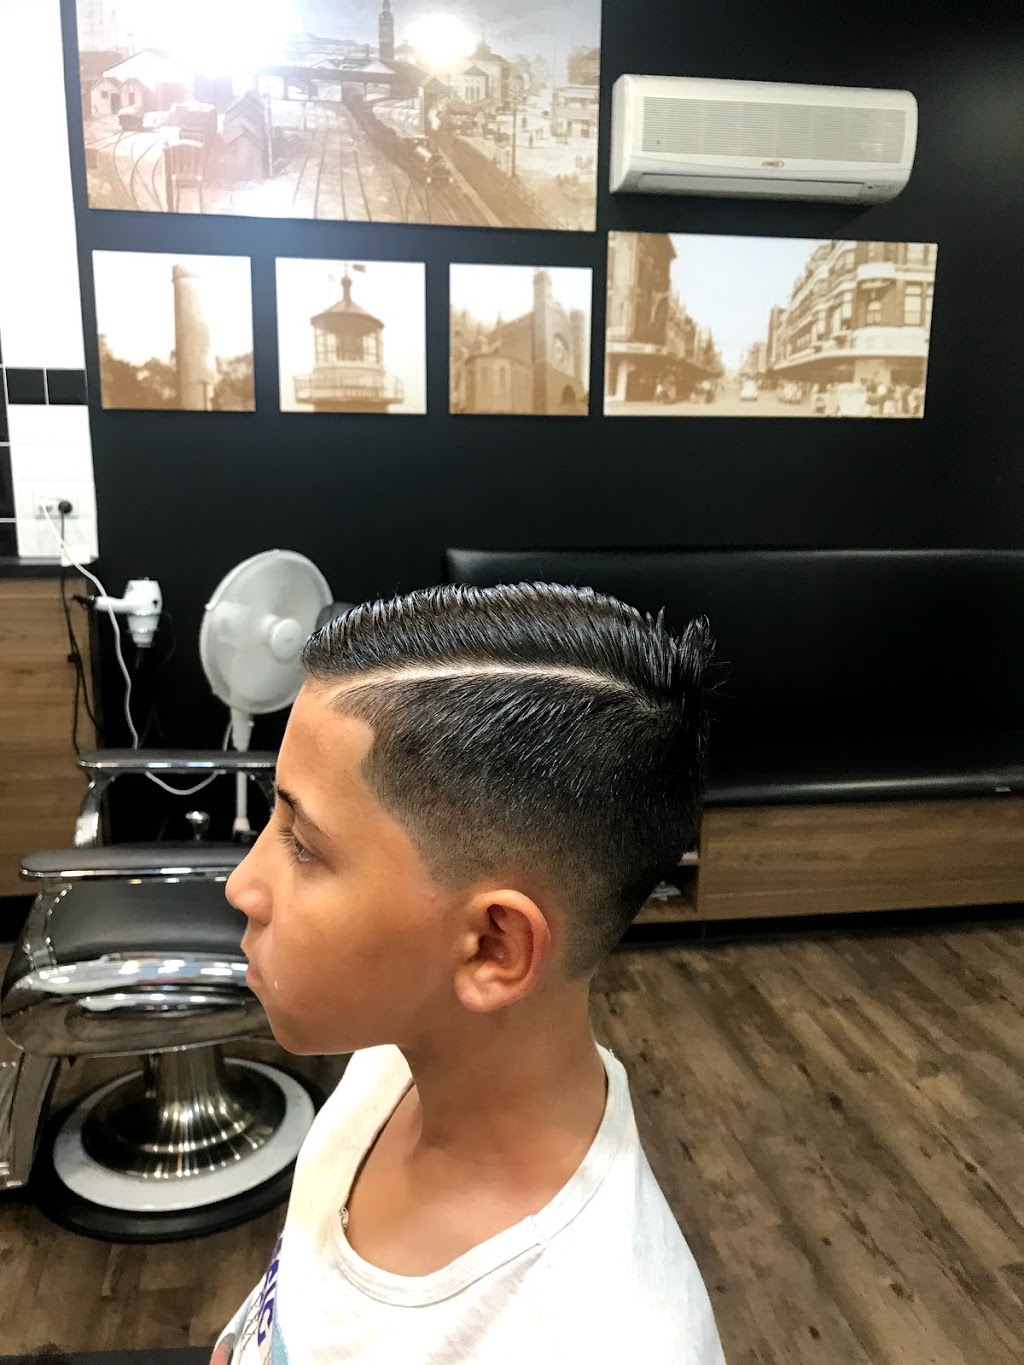 The Barber Castle | hair care | Elermore Shopping Centre, 20/137 Croudace Rd, Elermore Vale NSW 2287, Australia | 0415607911 OR +61 415 607 911